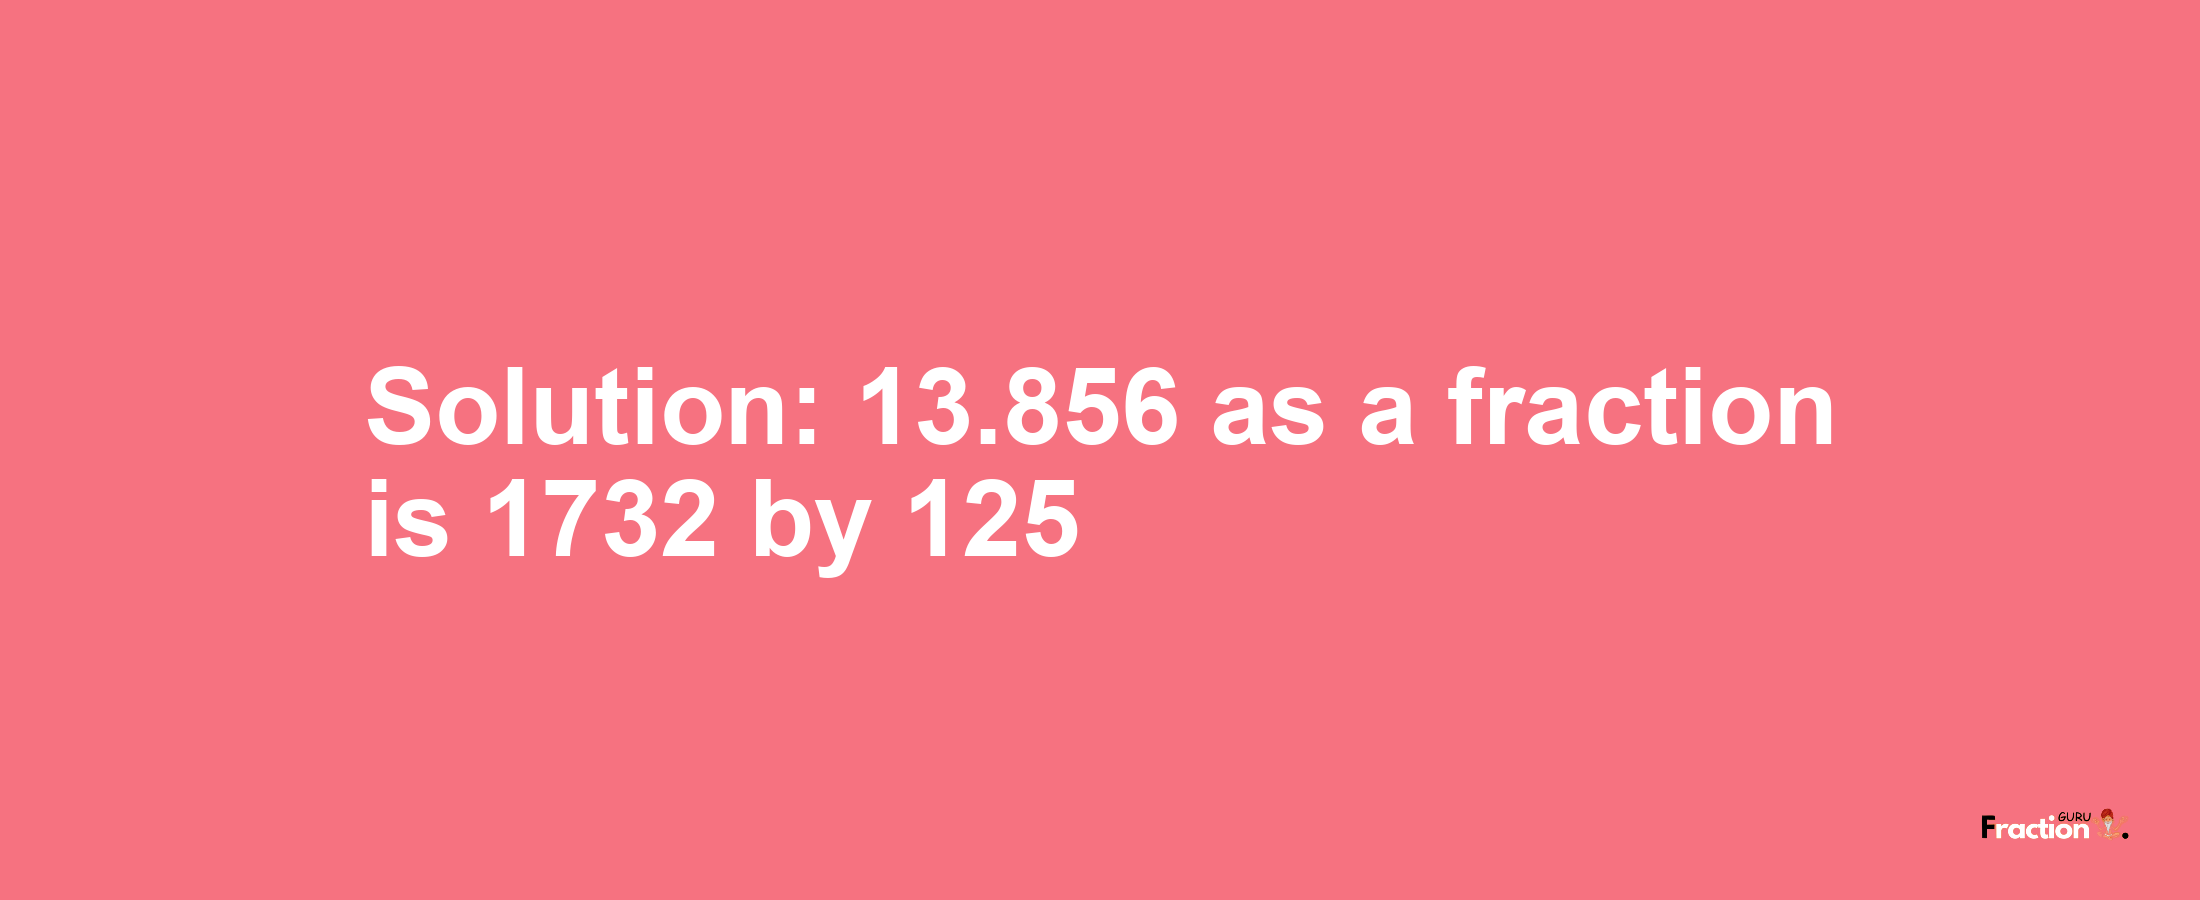 Solution:13.856 as a fraction is 1732/125